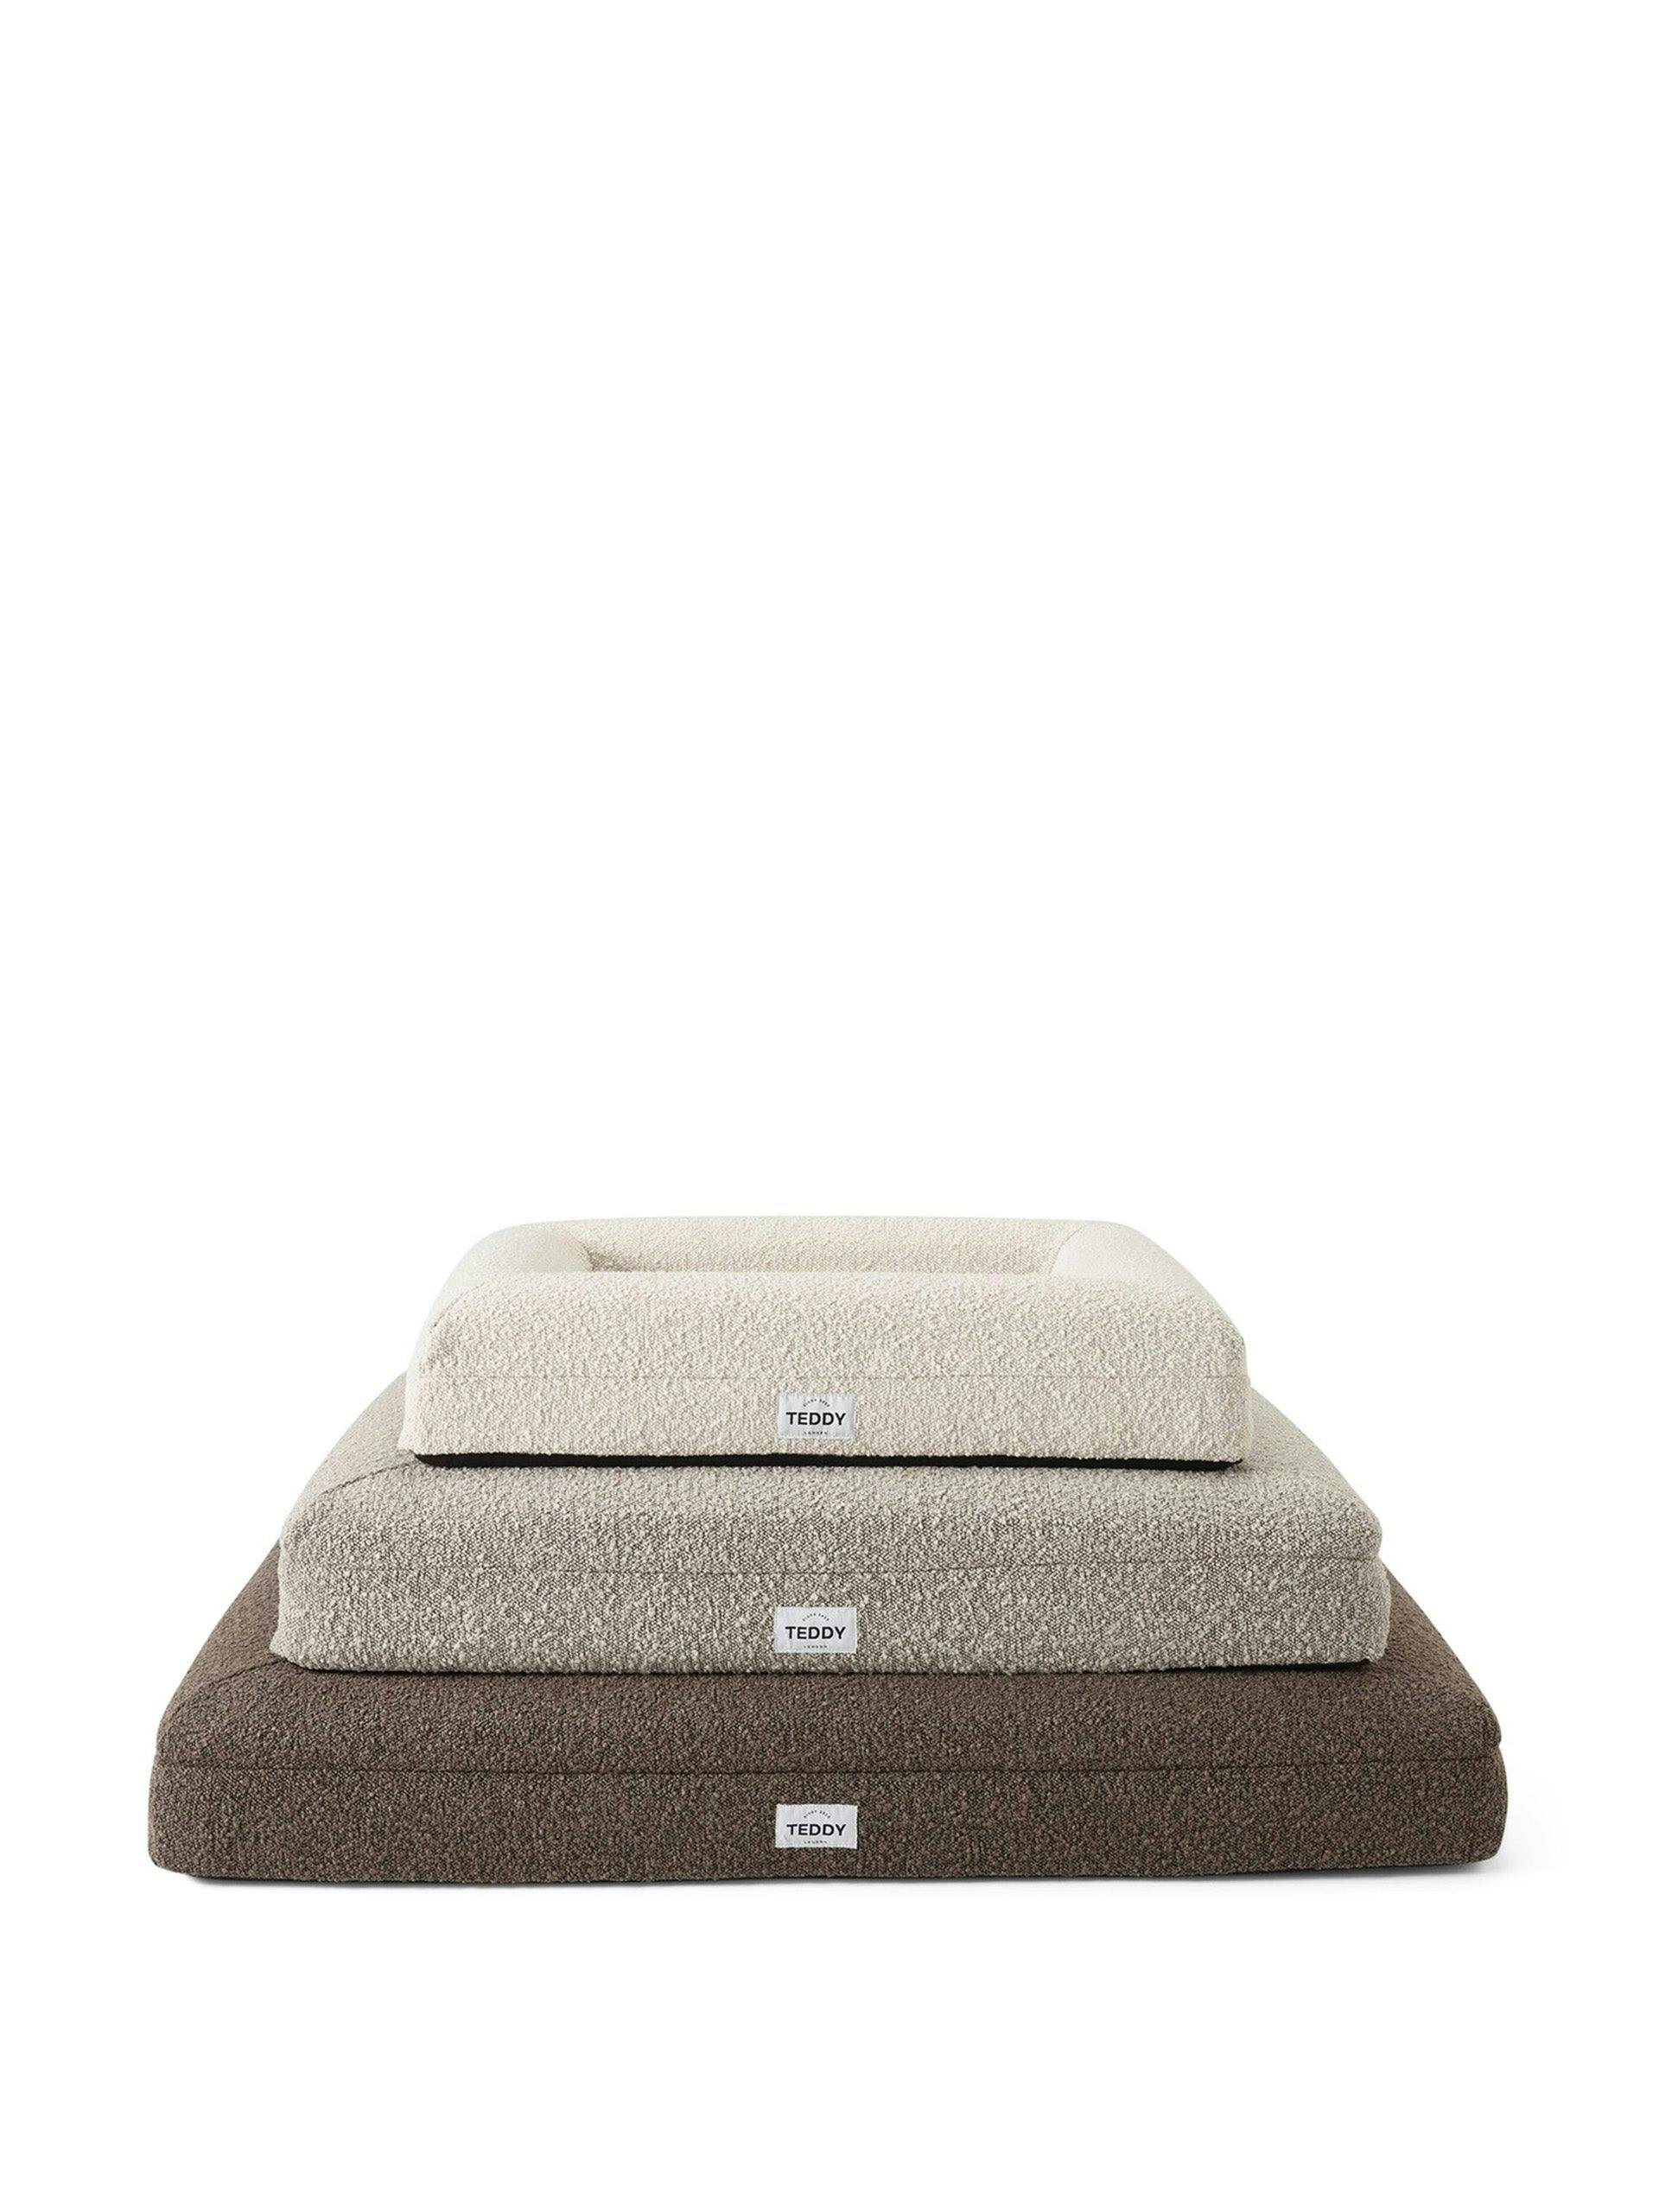 Large bouclé dog bed cover